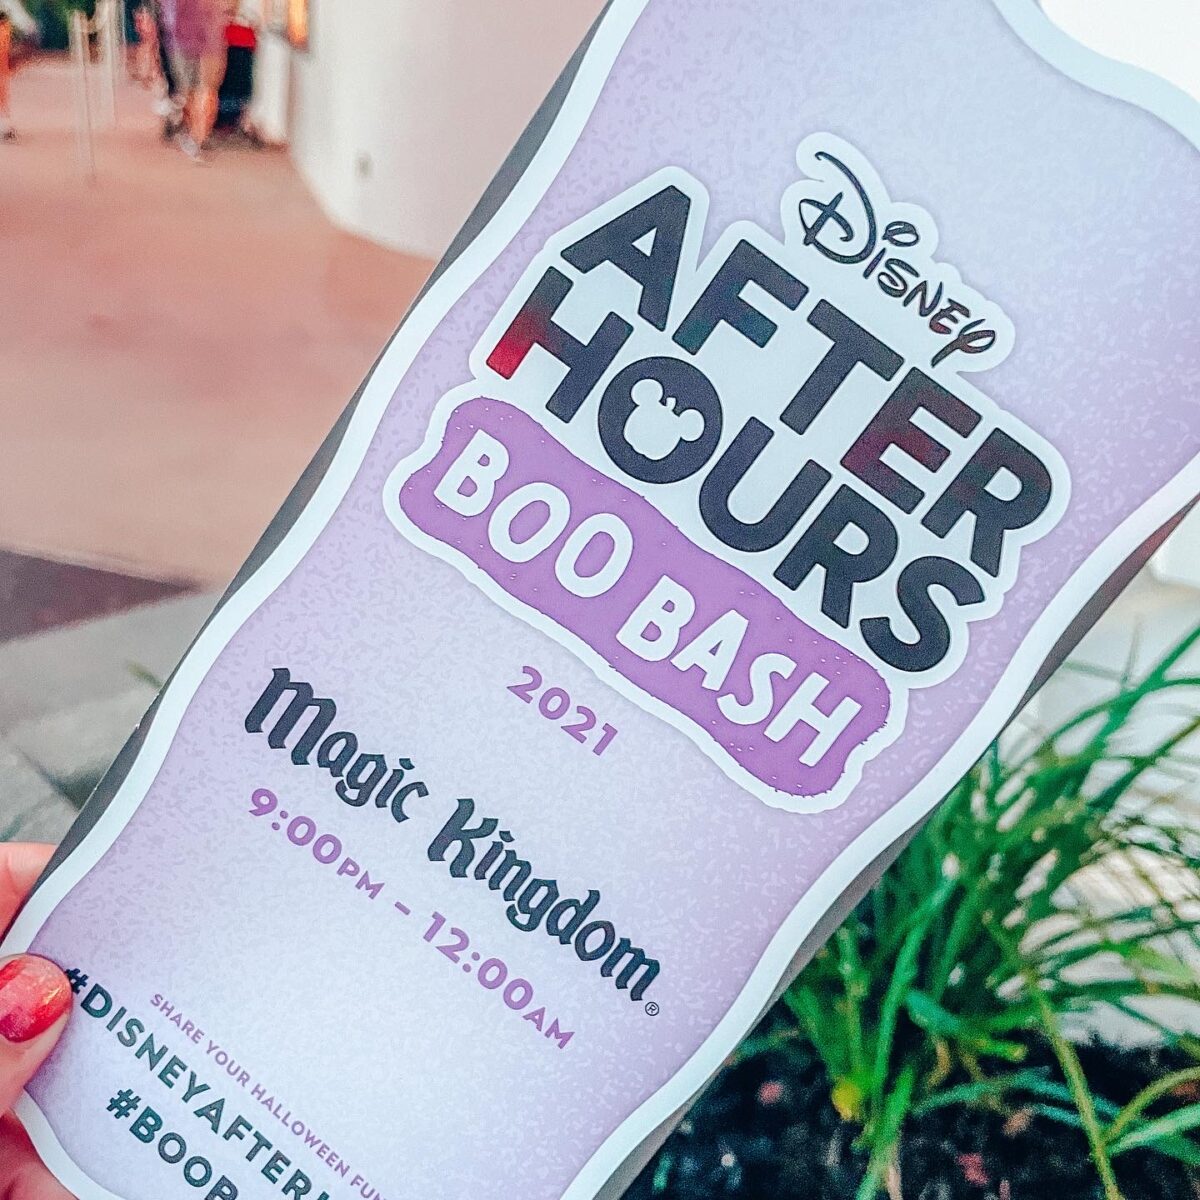 Disney’s After Hours Boo Bash Tips